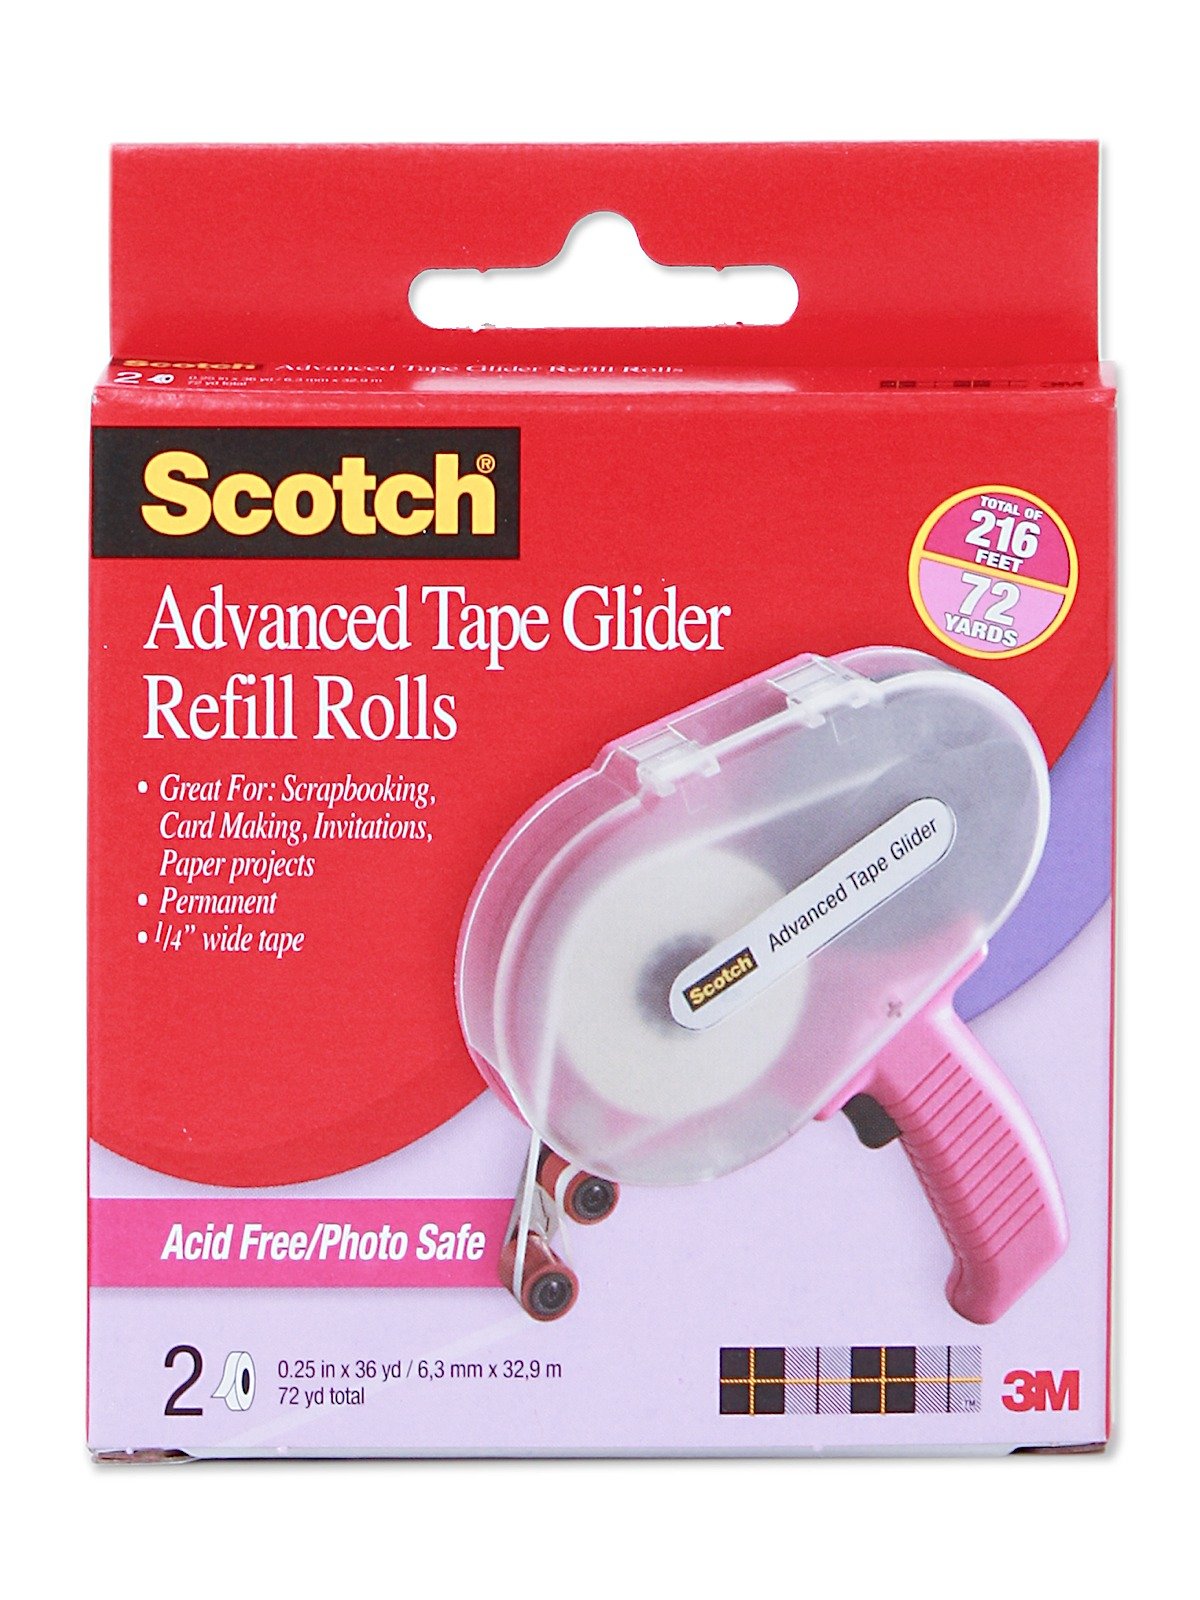 Scotch Advanced Tape Runner Refill - Teal, White Clear Blue, by Scotch